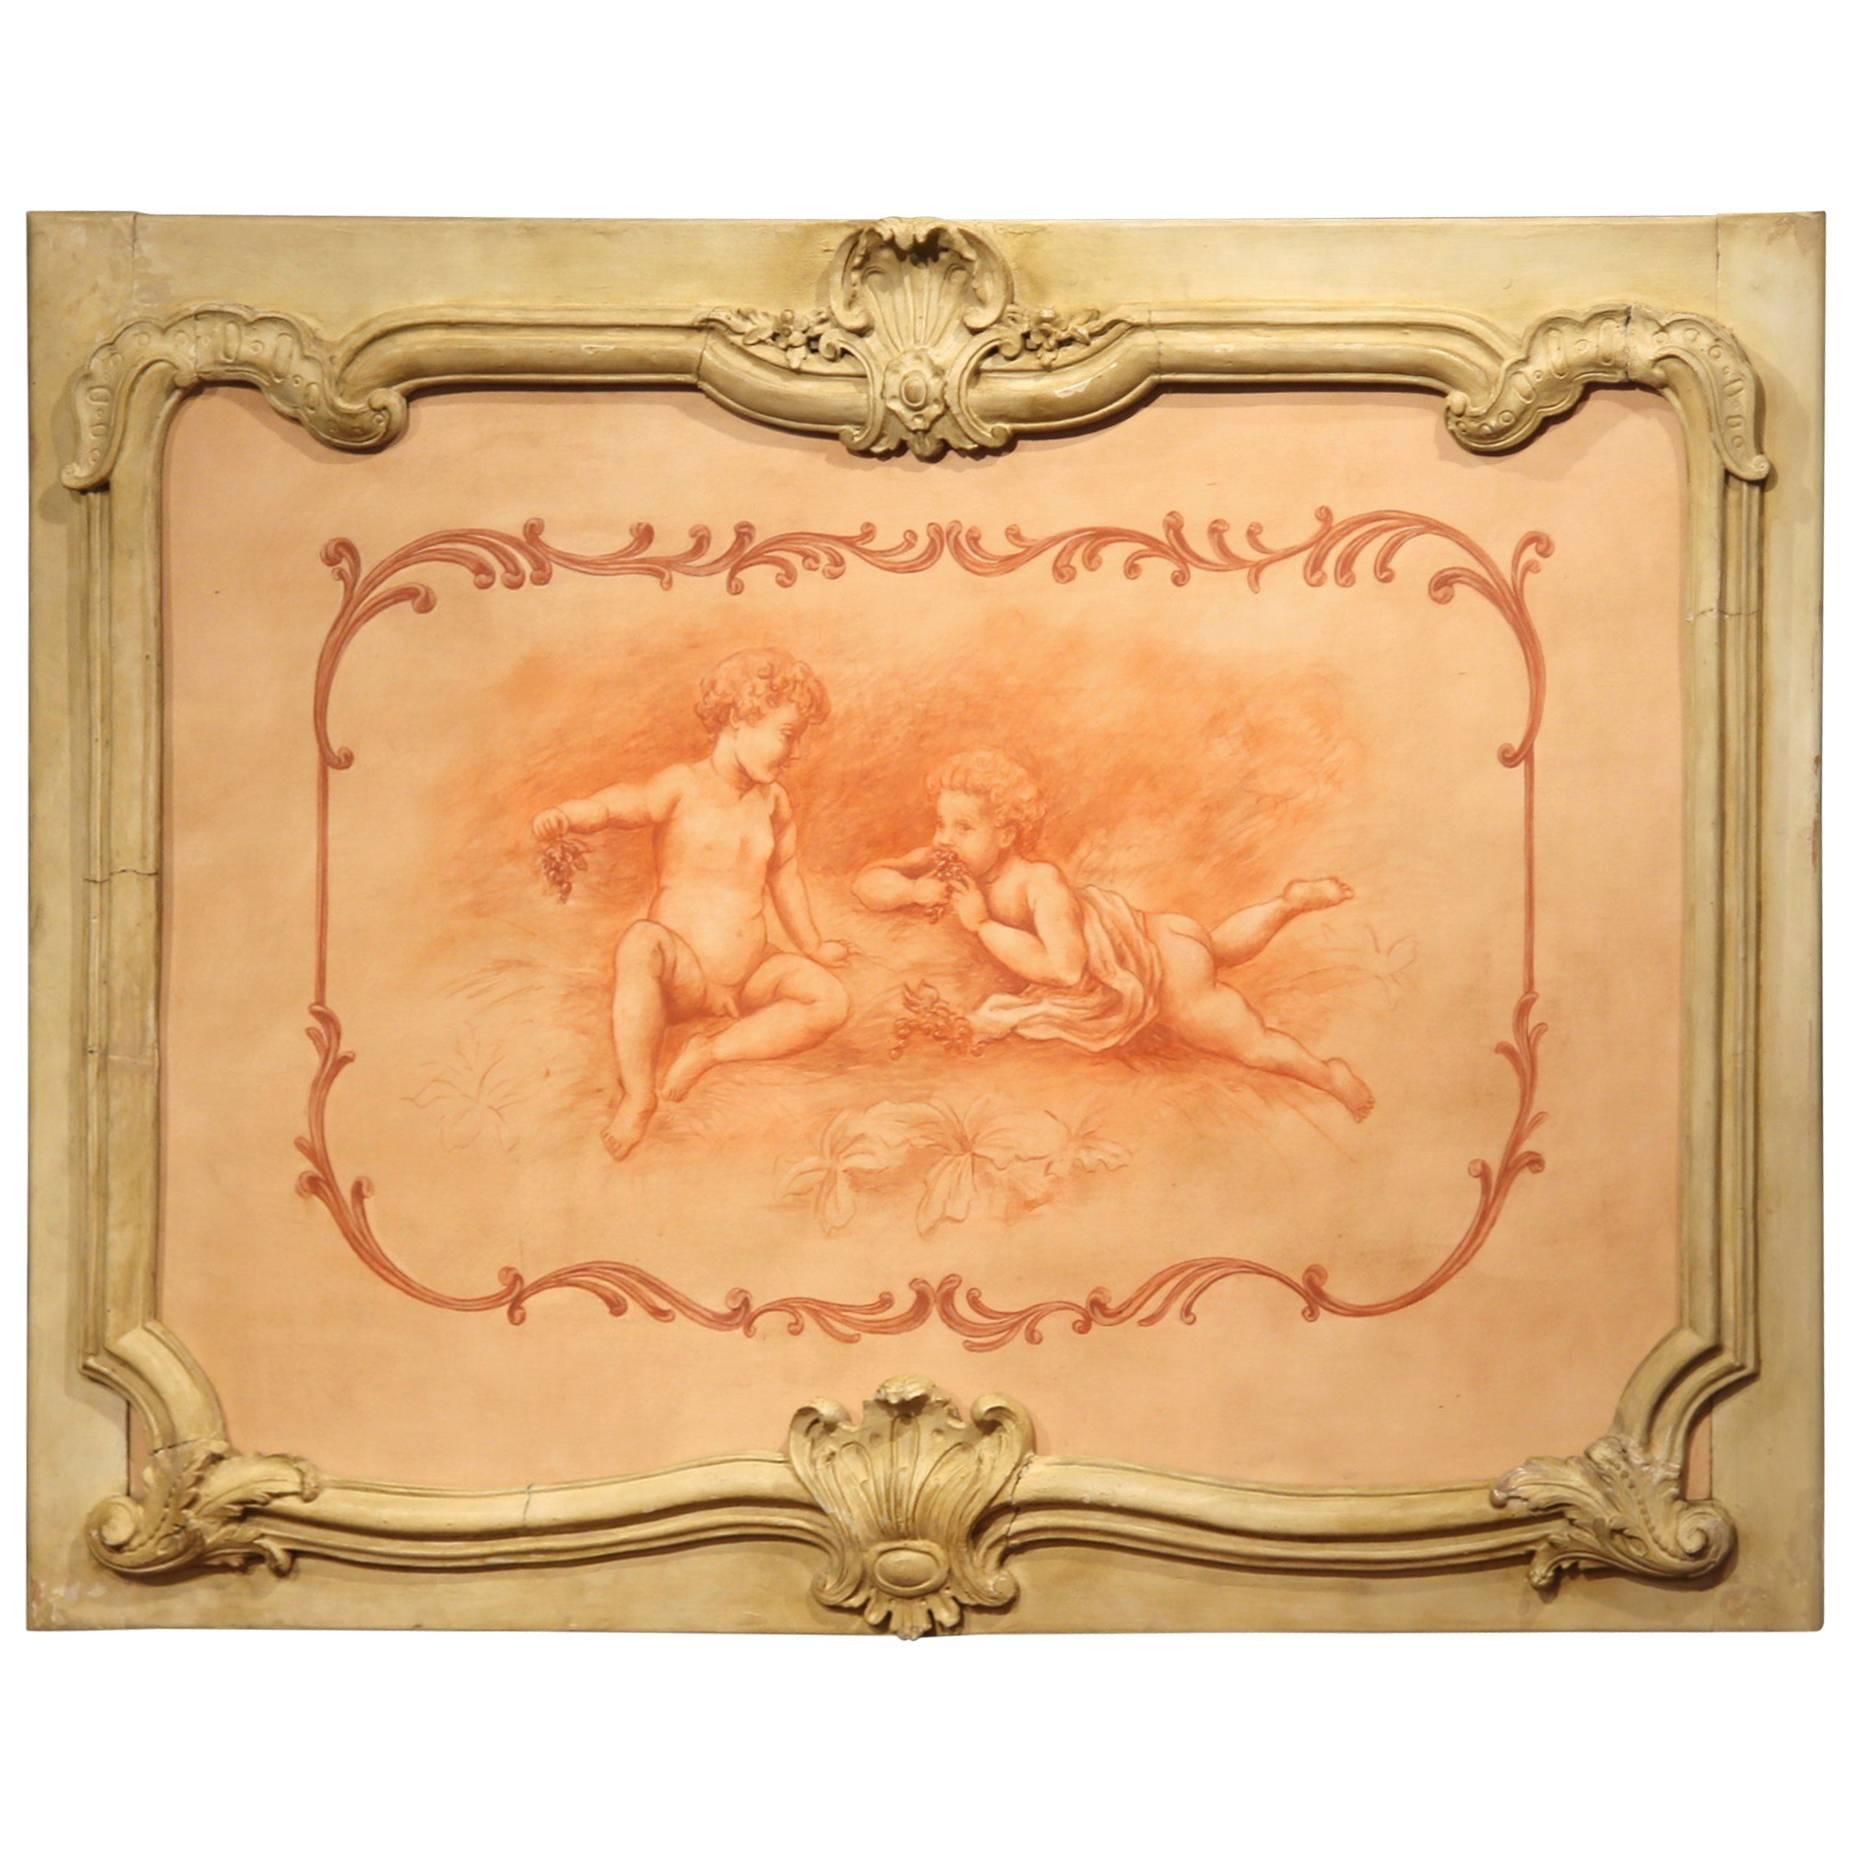 19th Century French Carved Painted Wood Panel Frame with Cherubs Eating Grapes